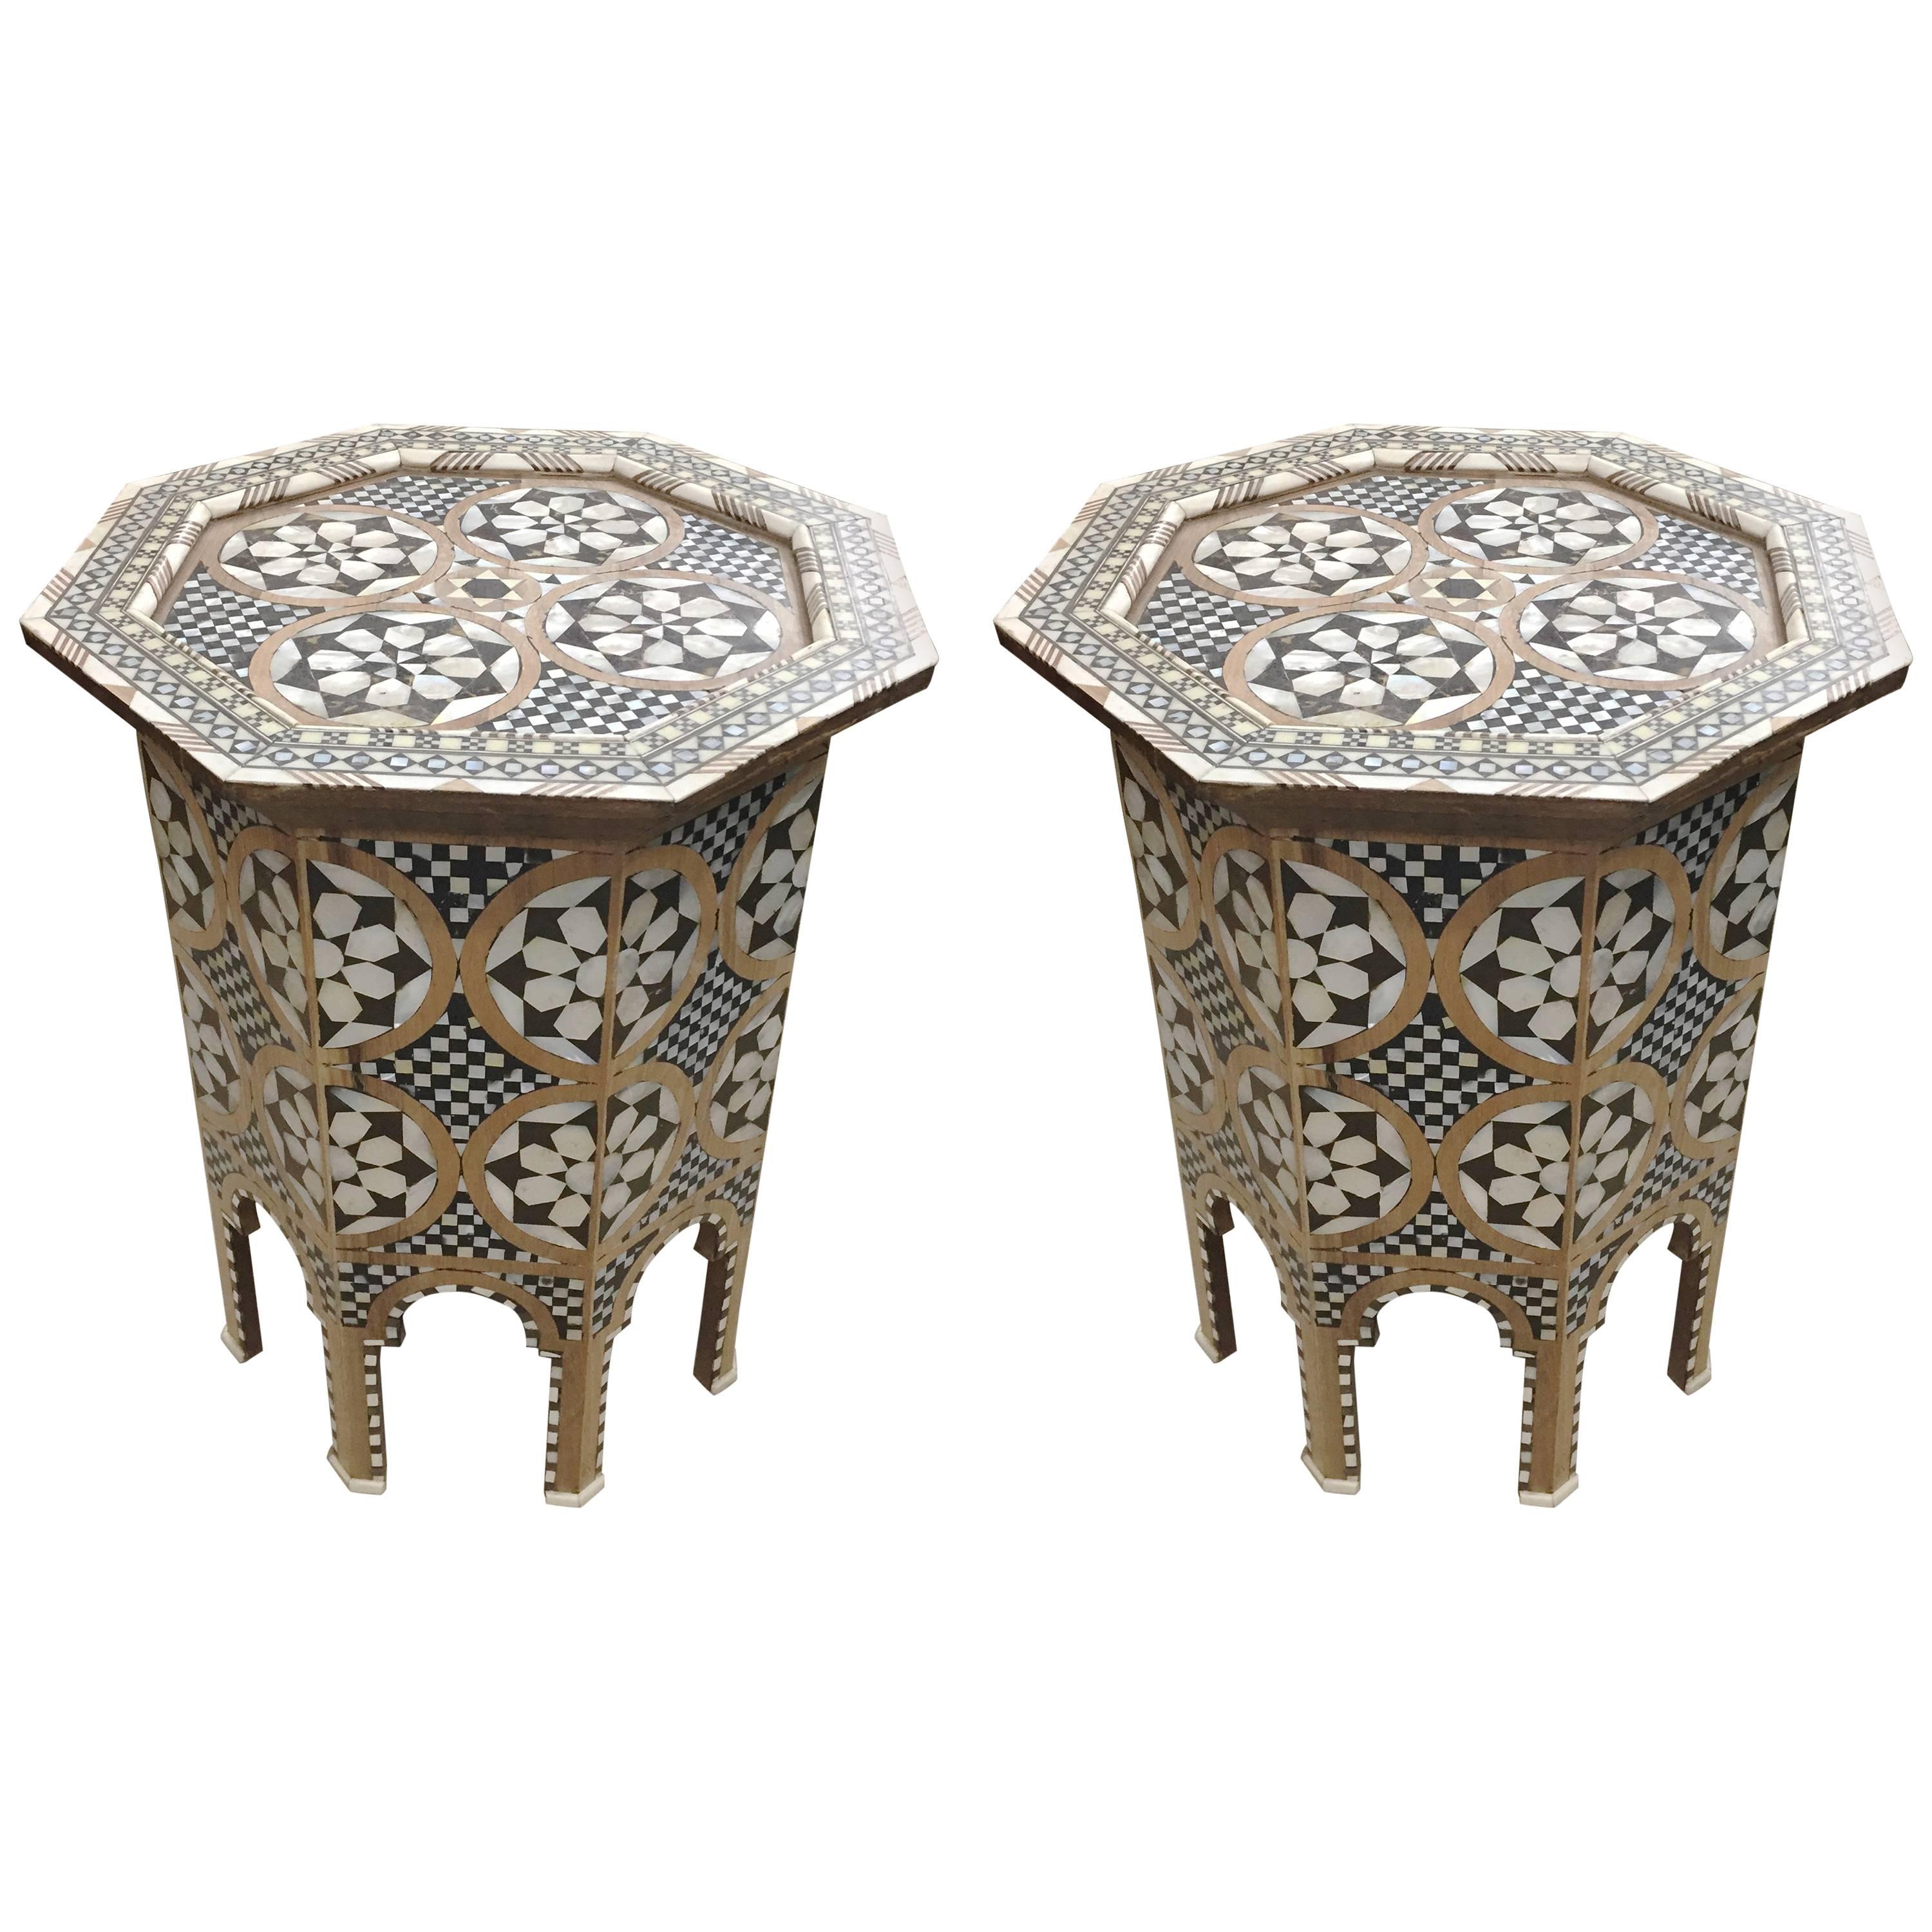 Pair of Moroccan Inlay Geometric Tables